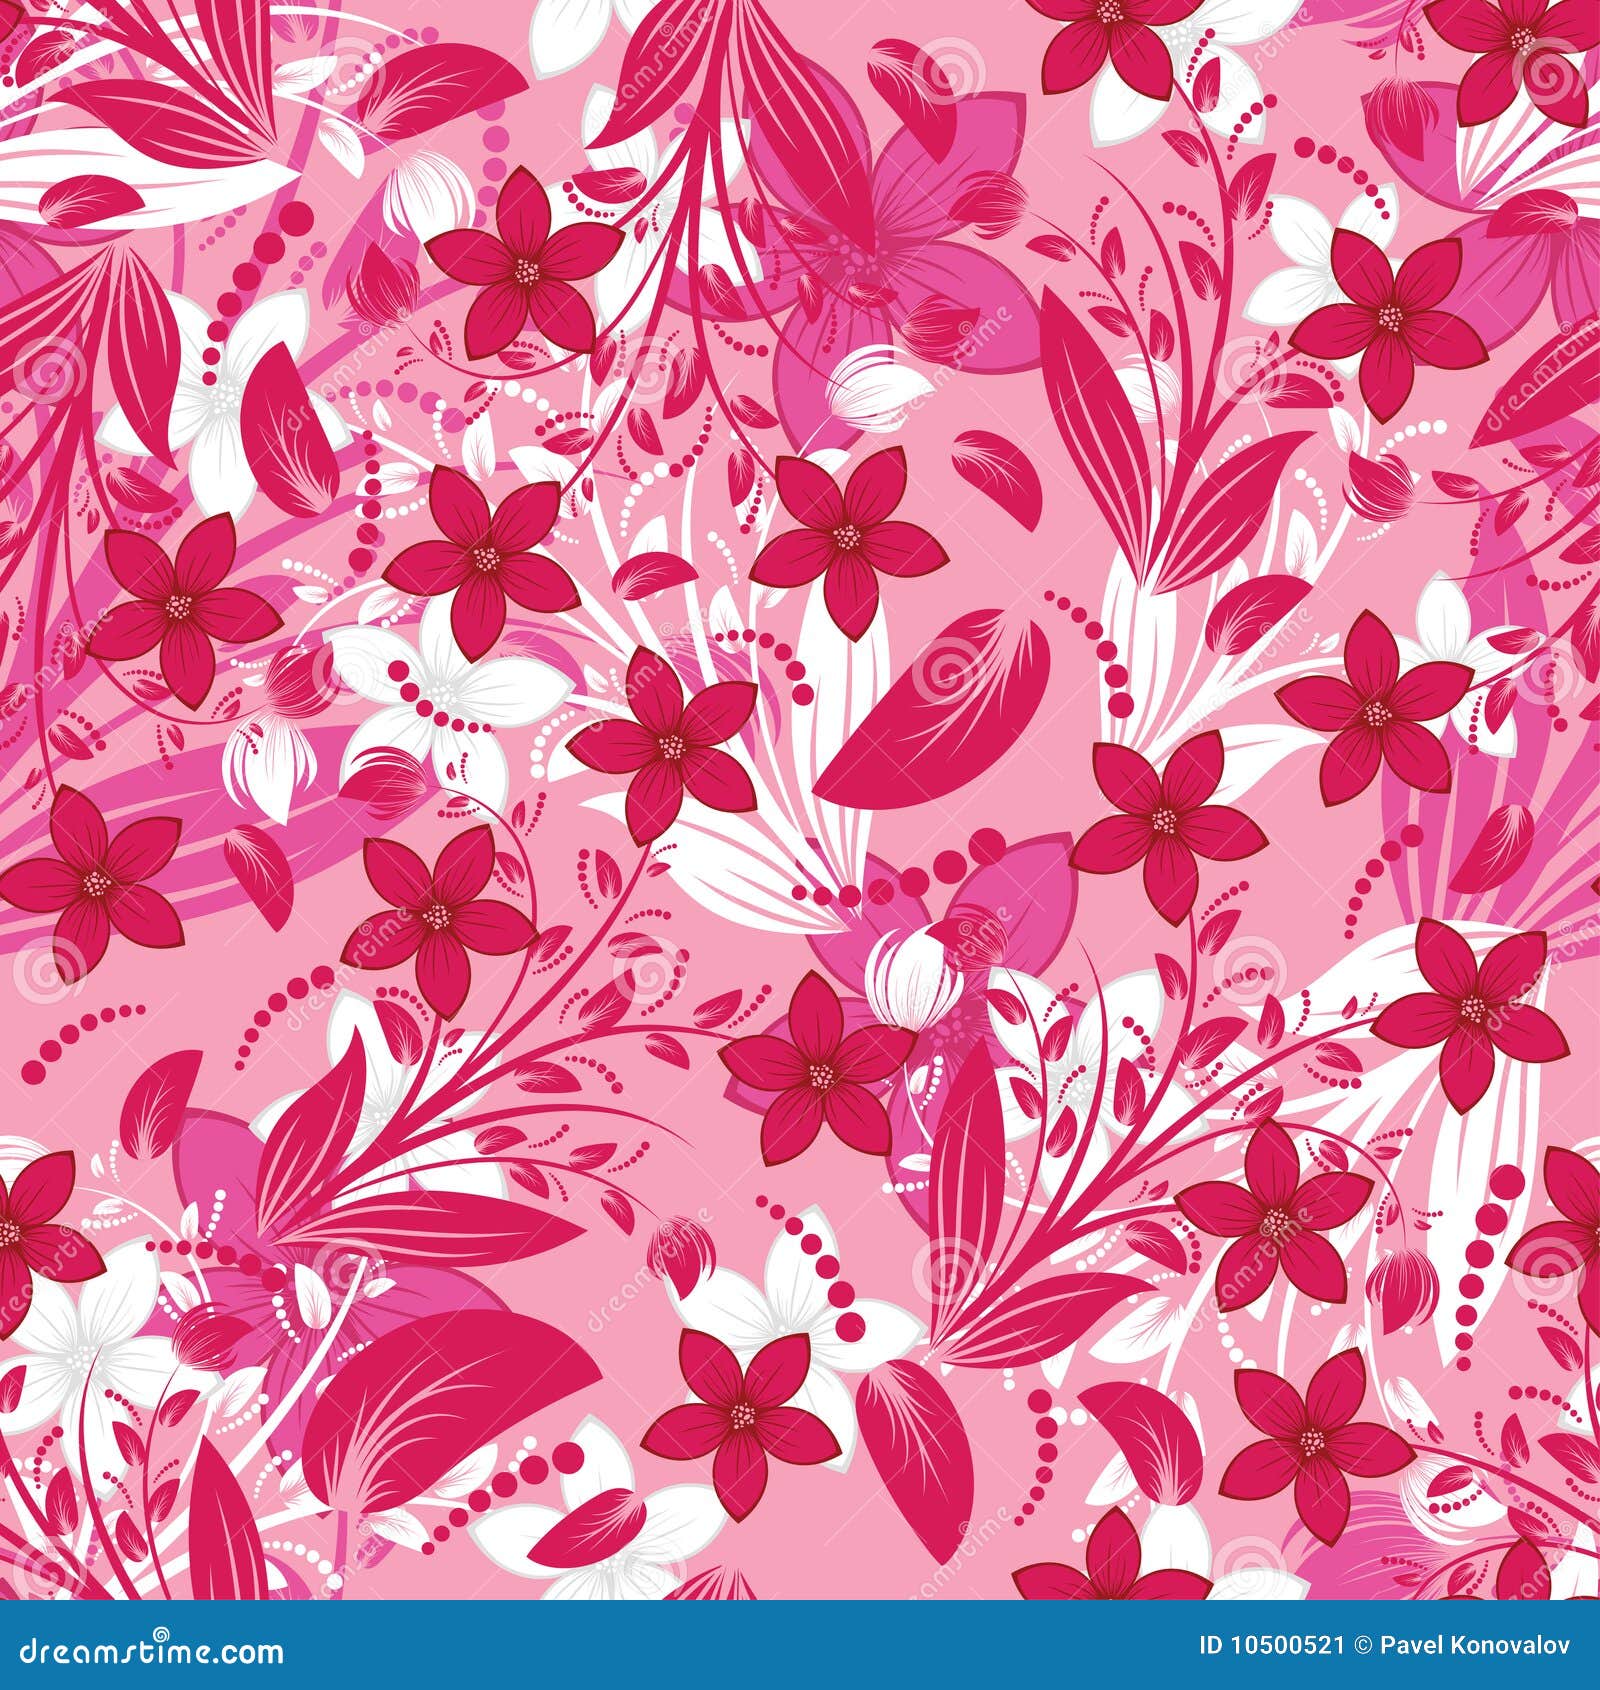 Seamless floral background stock vector. Illustration of floral - 10500521